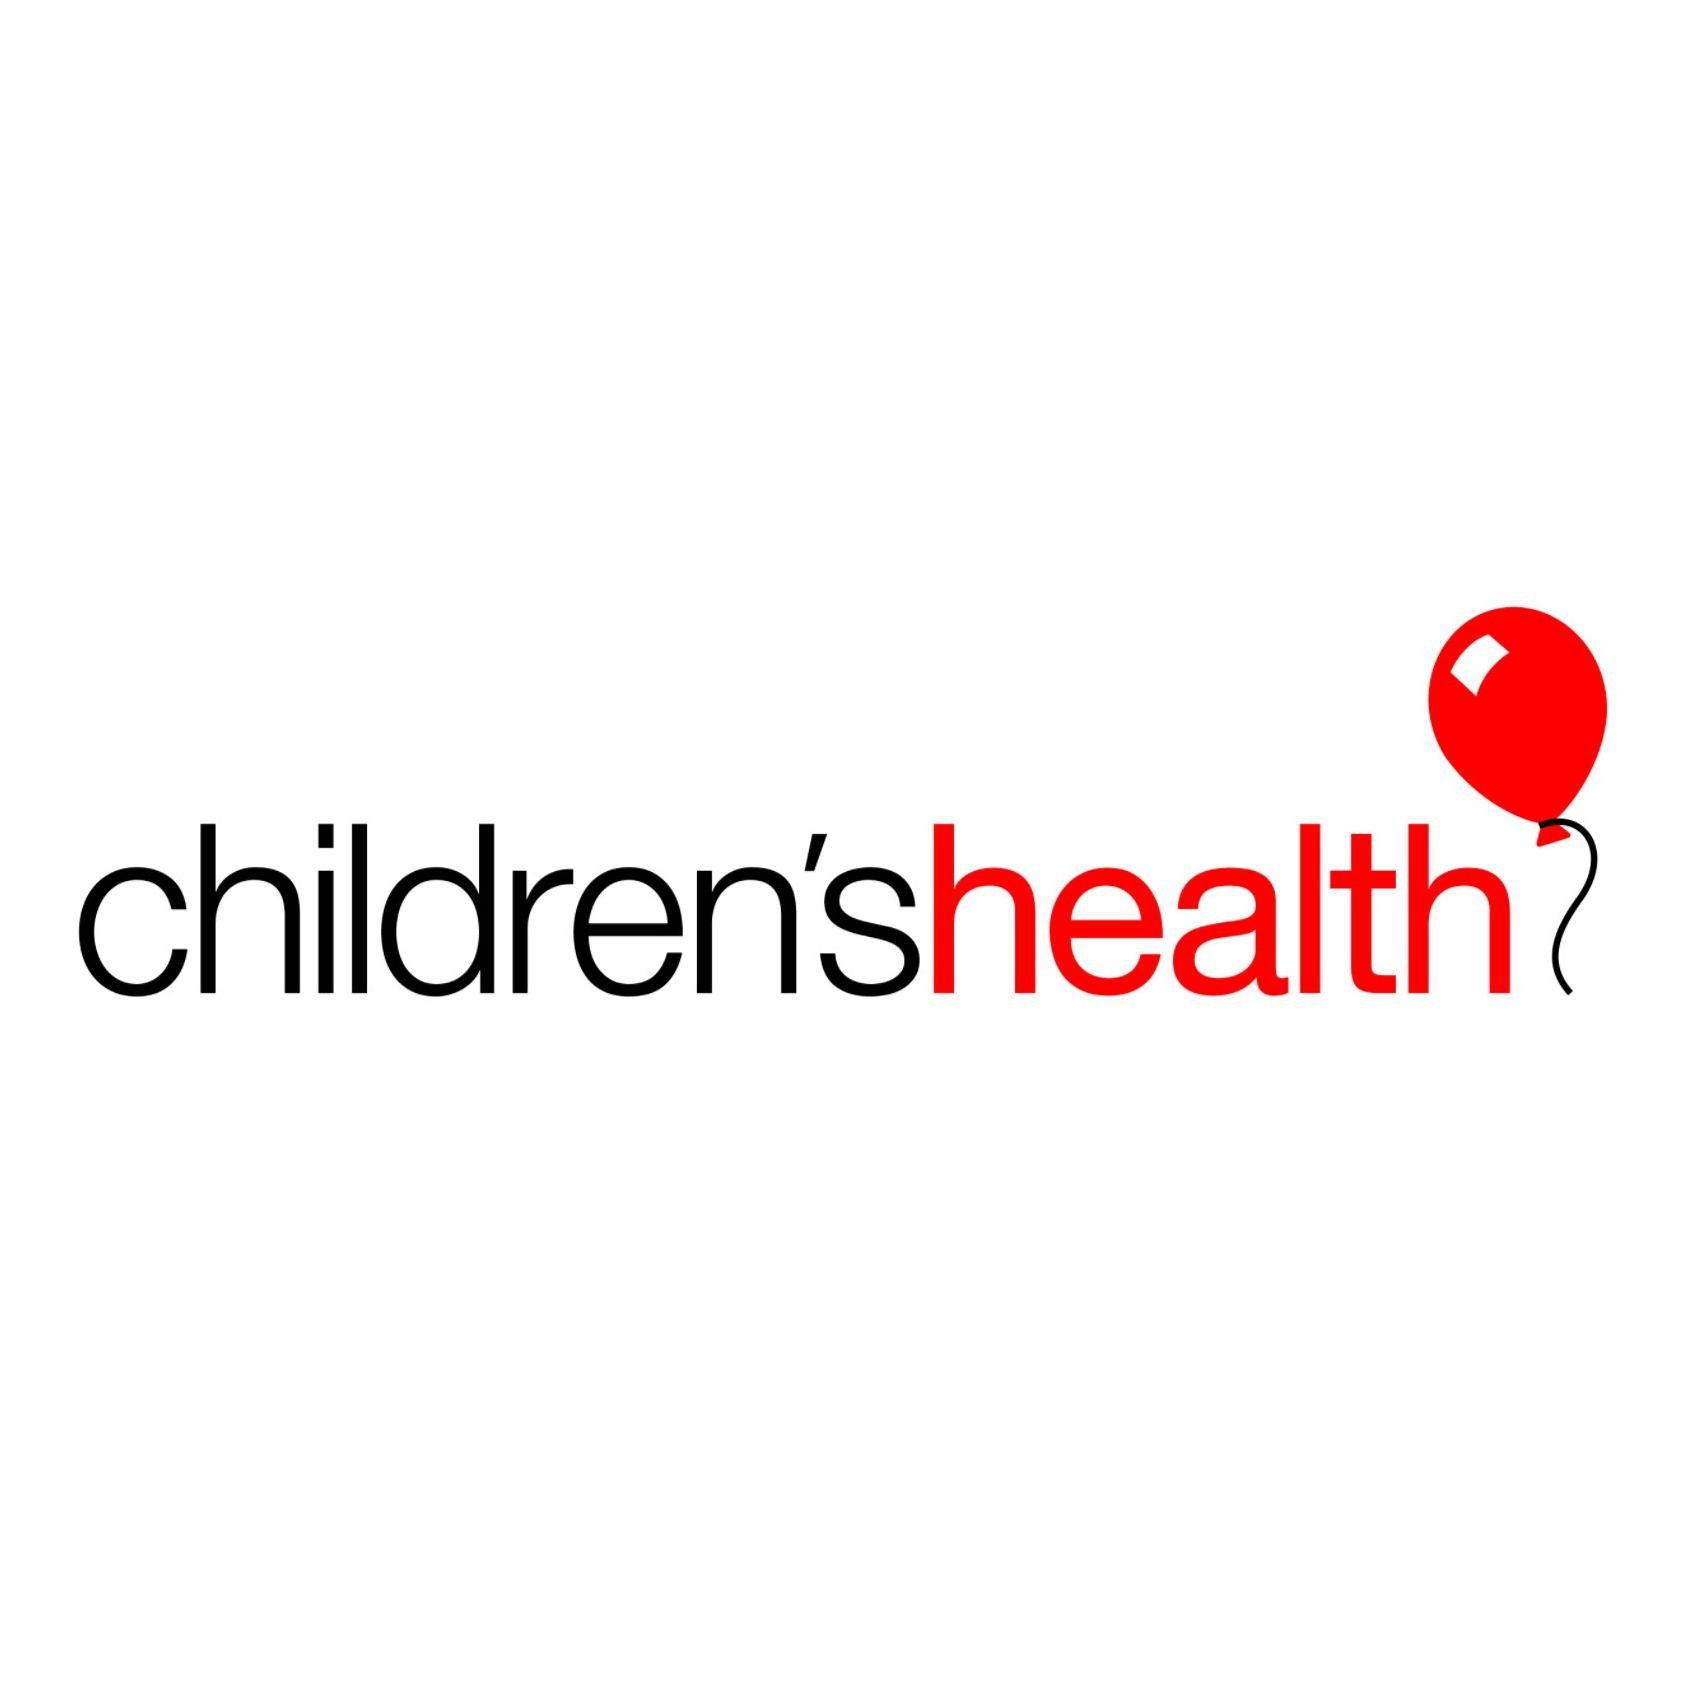 Children’s Health Content Strategy Focuses on Search, Engagement to Achieve Record-Breaking Results - Logo - https://s41078.pcdn.co/wp-content/uploads/2020/06/Childrens-Health_Content-Marketing.jpg